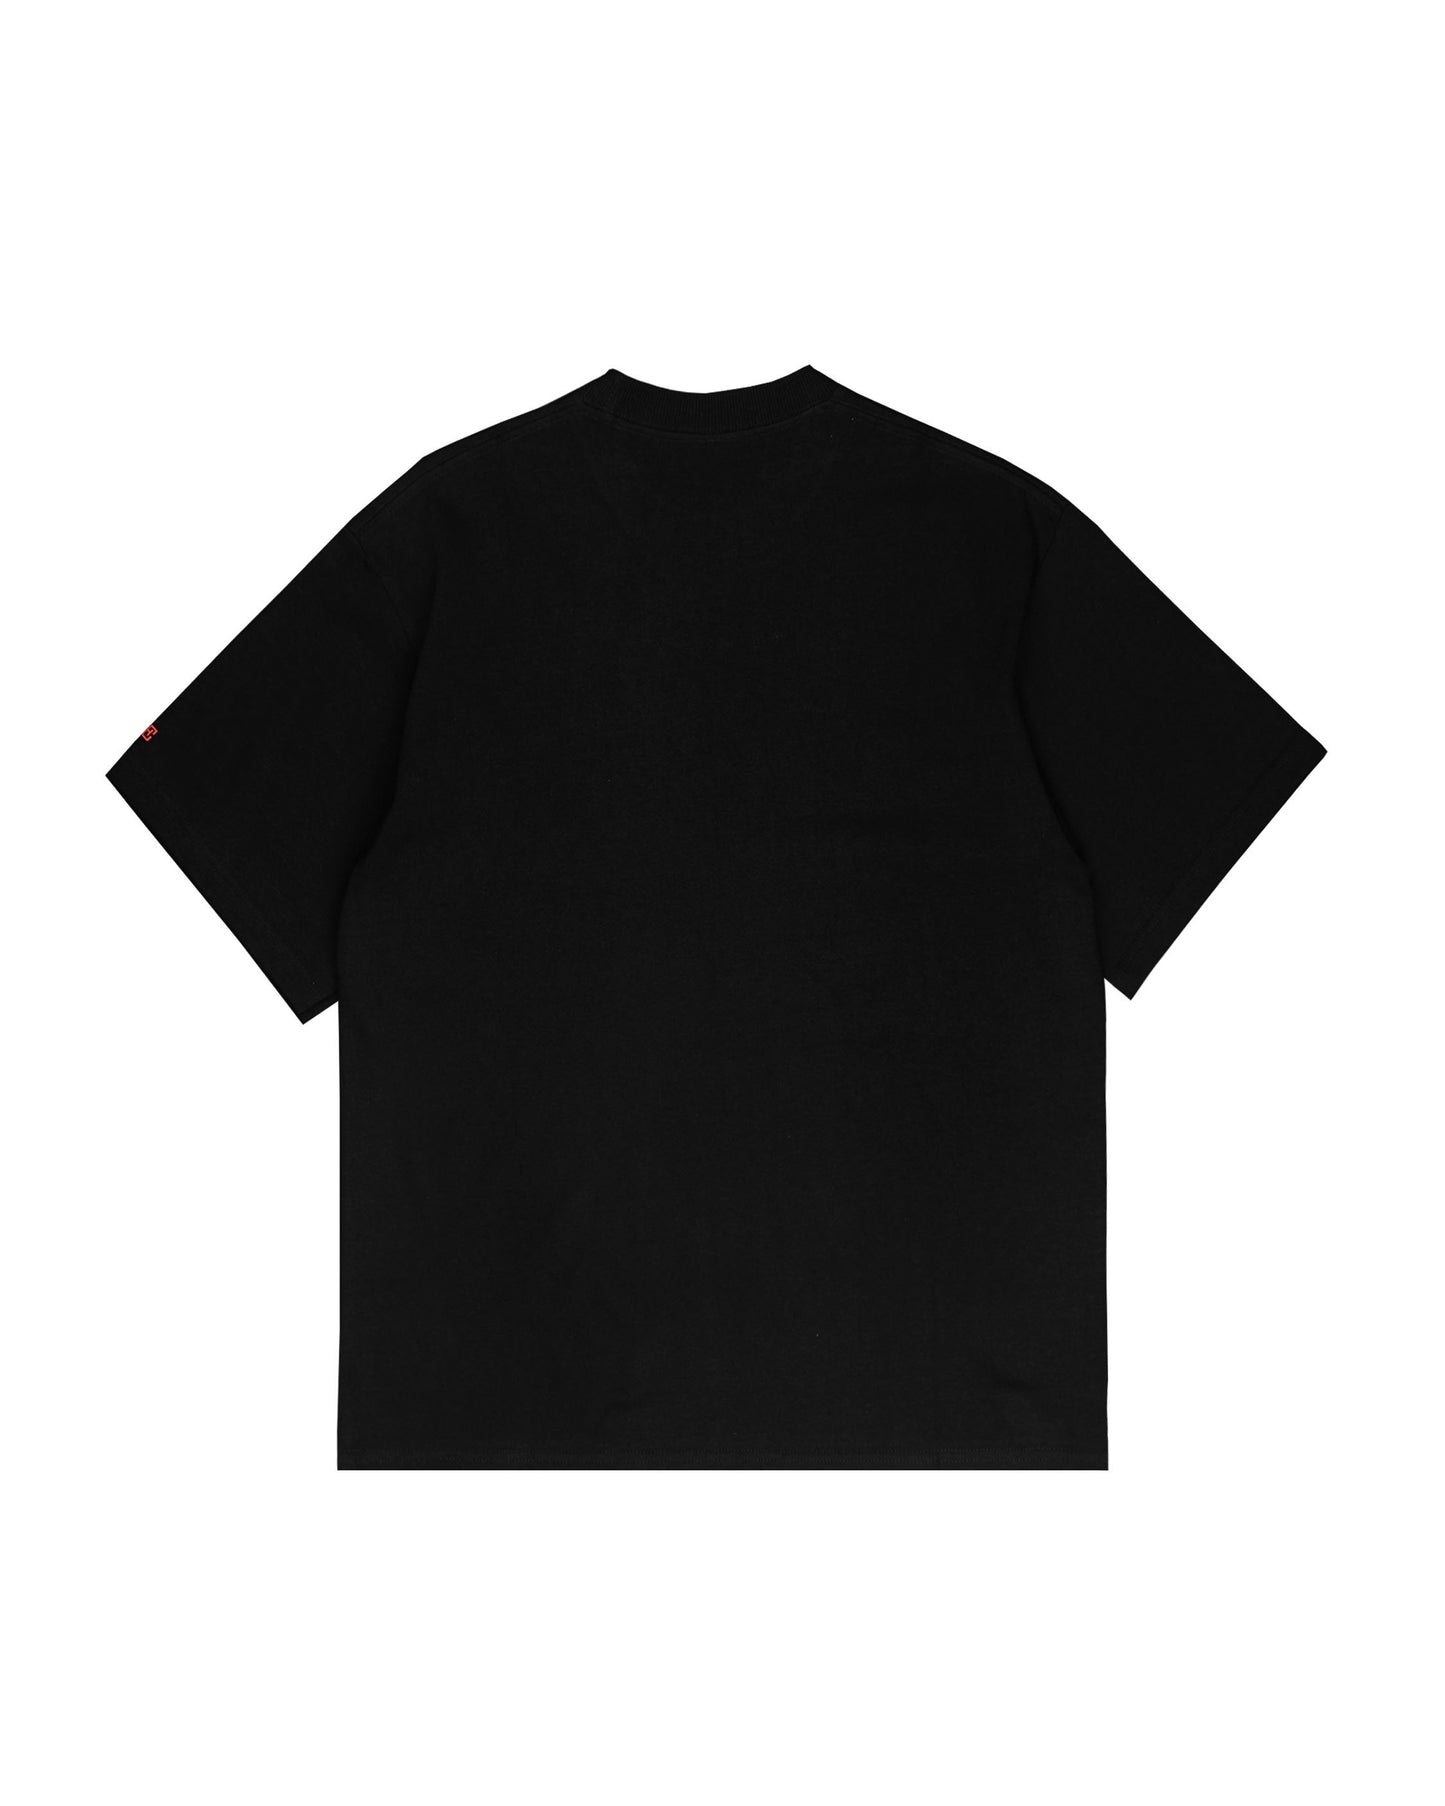 Provo Black Relaxed Fit Tees